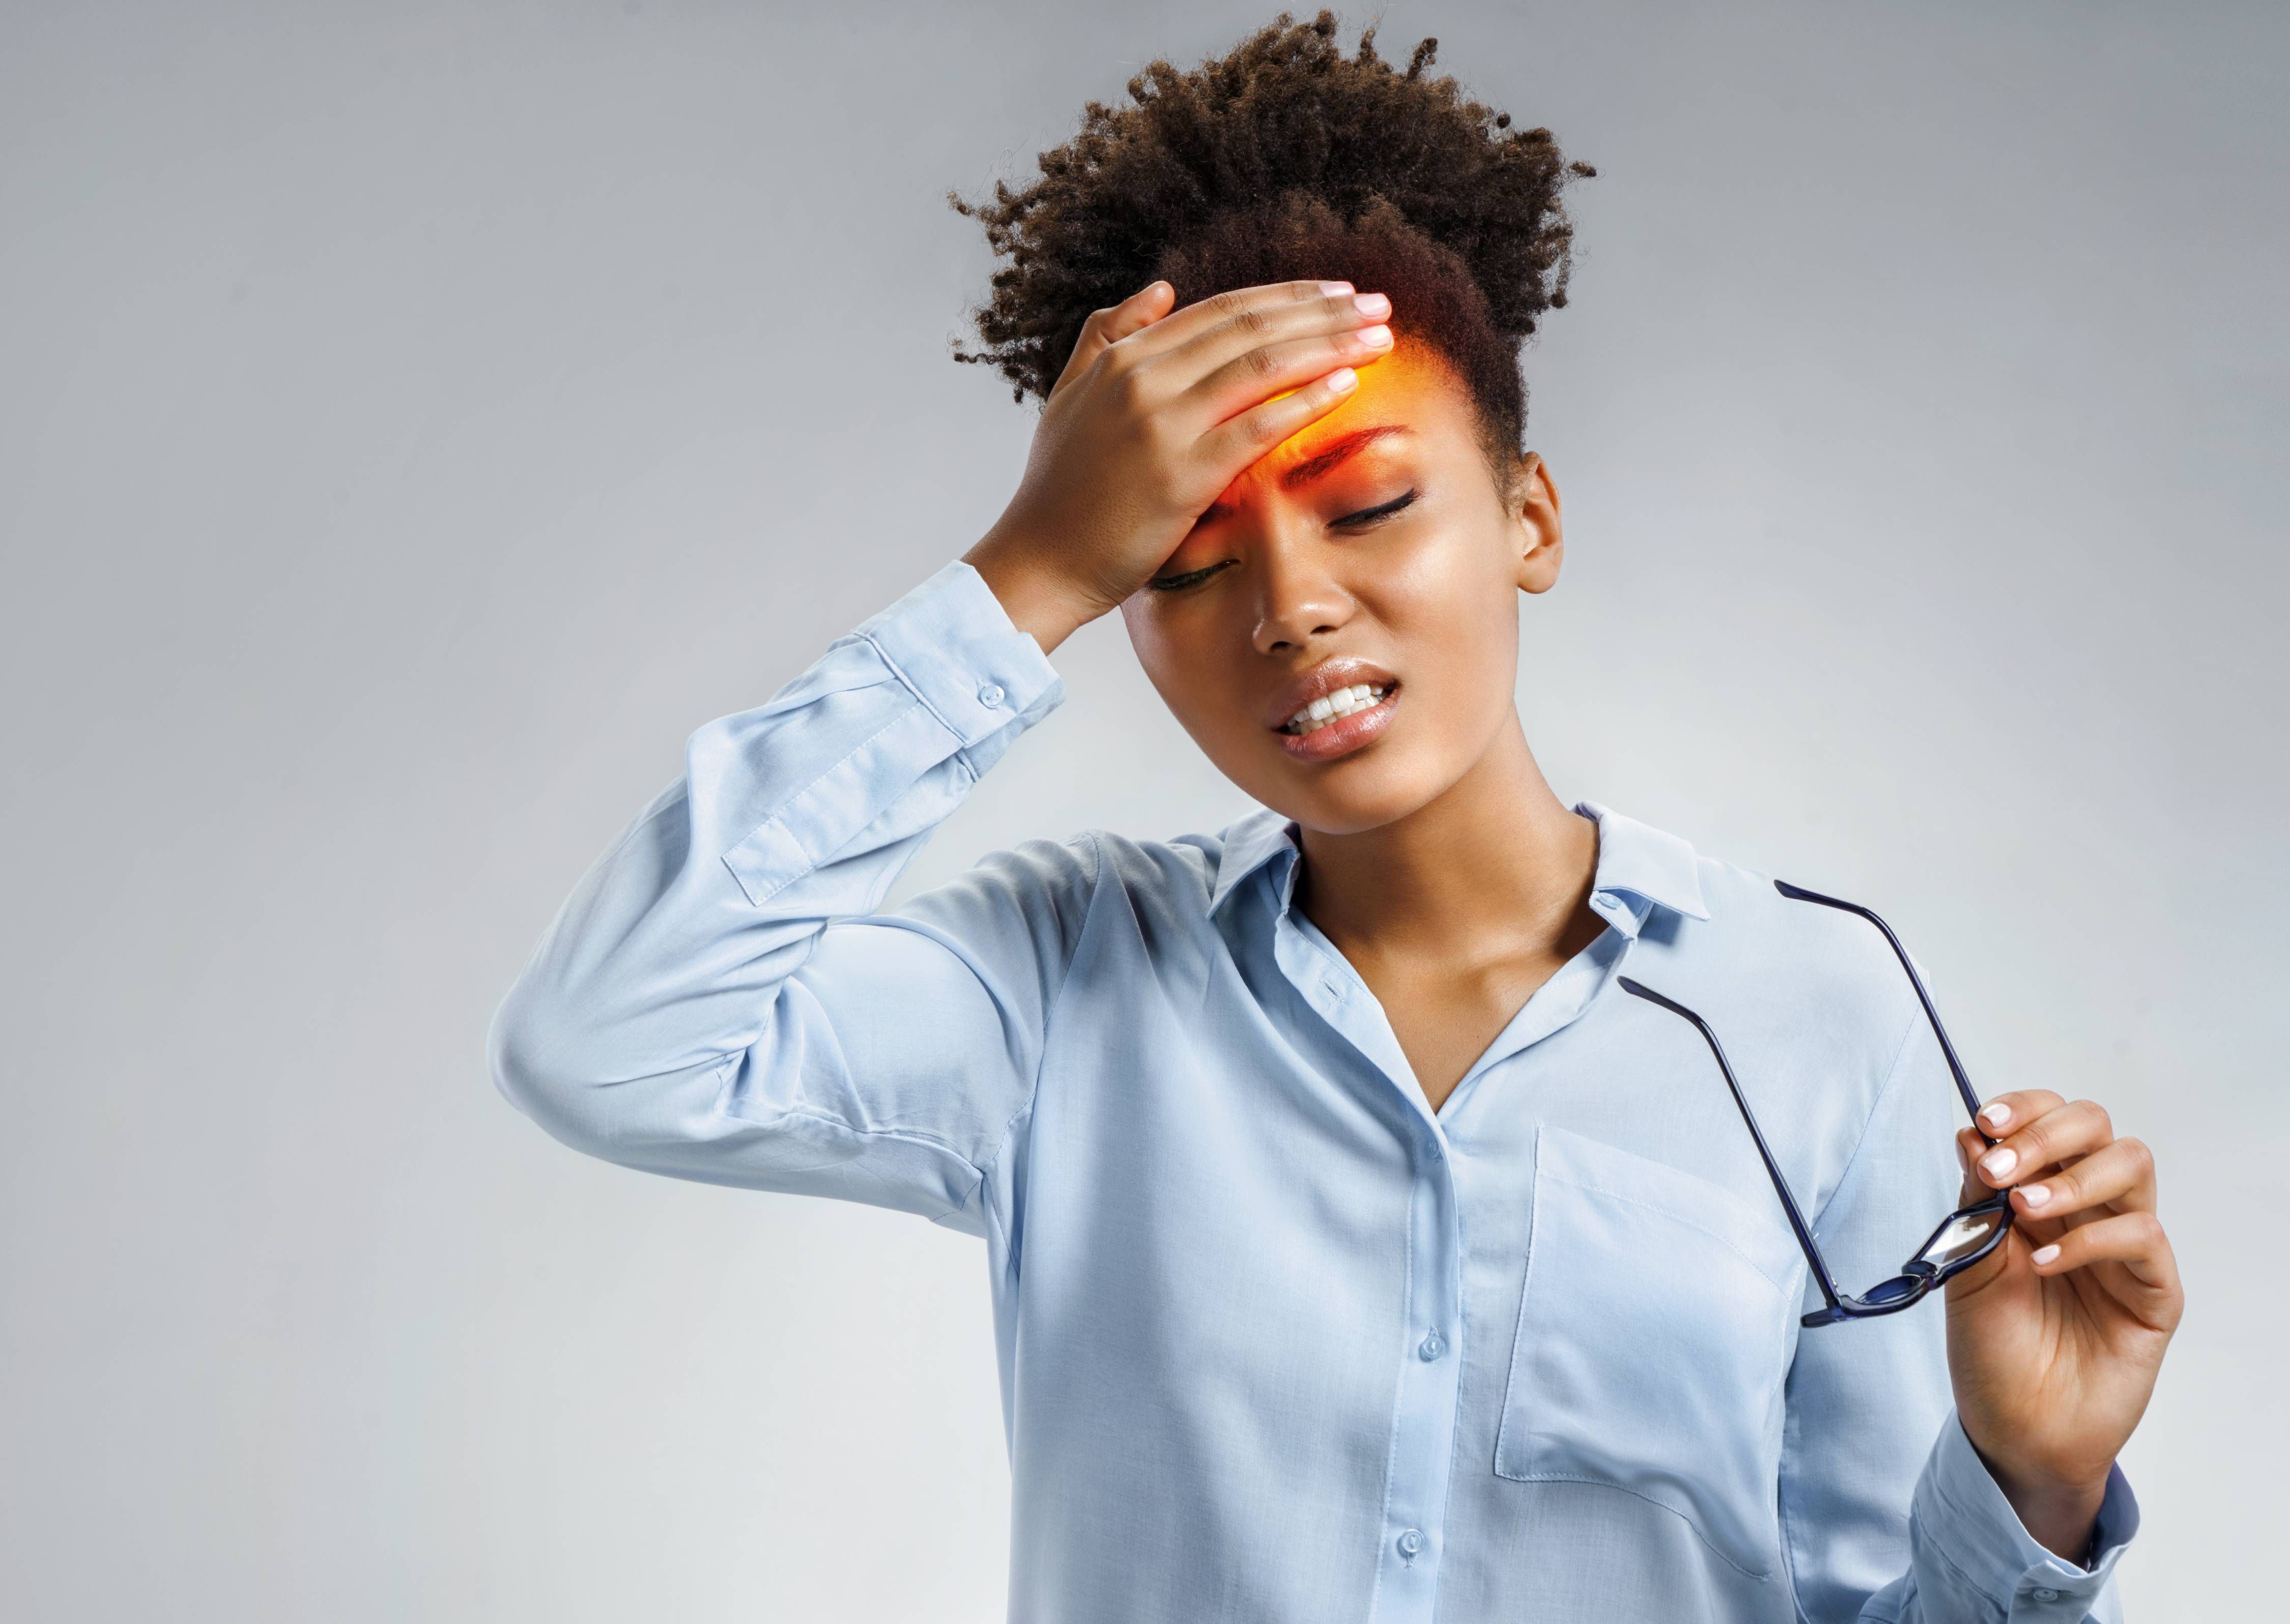 How Chiropractic Care Helps with Headaches